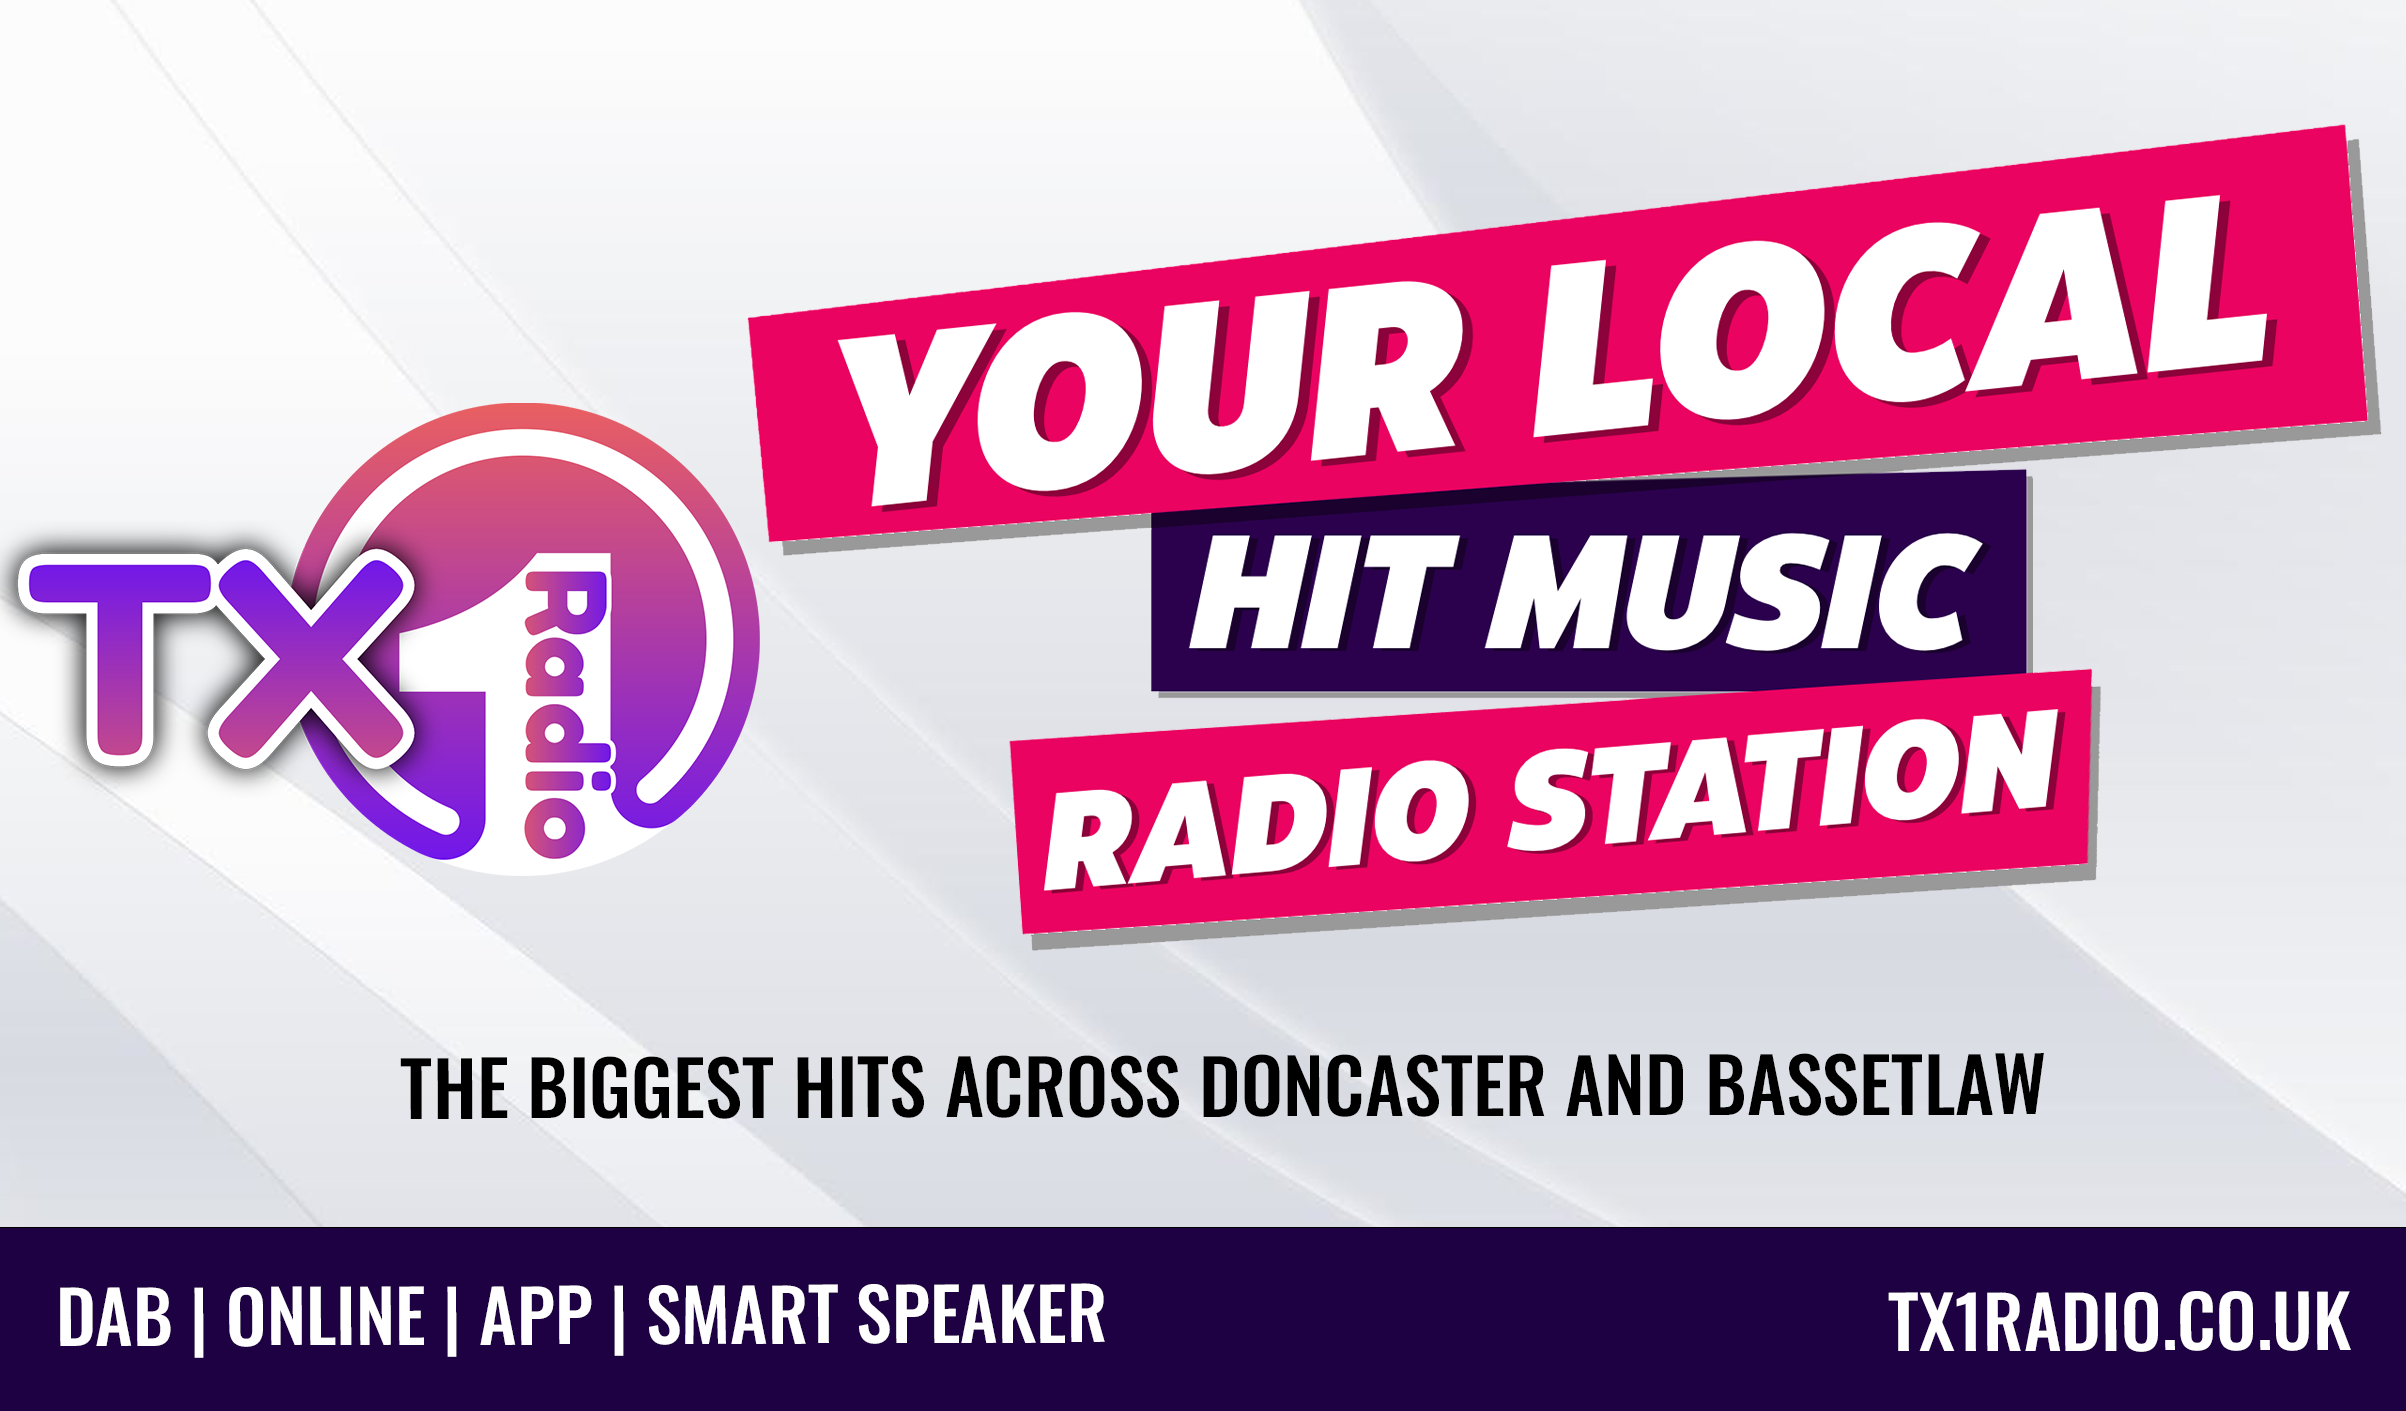 Afectar Ocupar miembro TX1 Radio - Doncaster & Bassetlaw's Local Hit Music Station